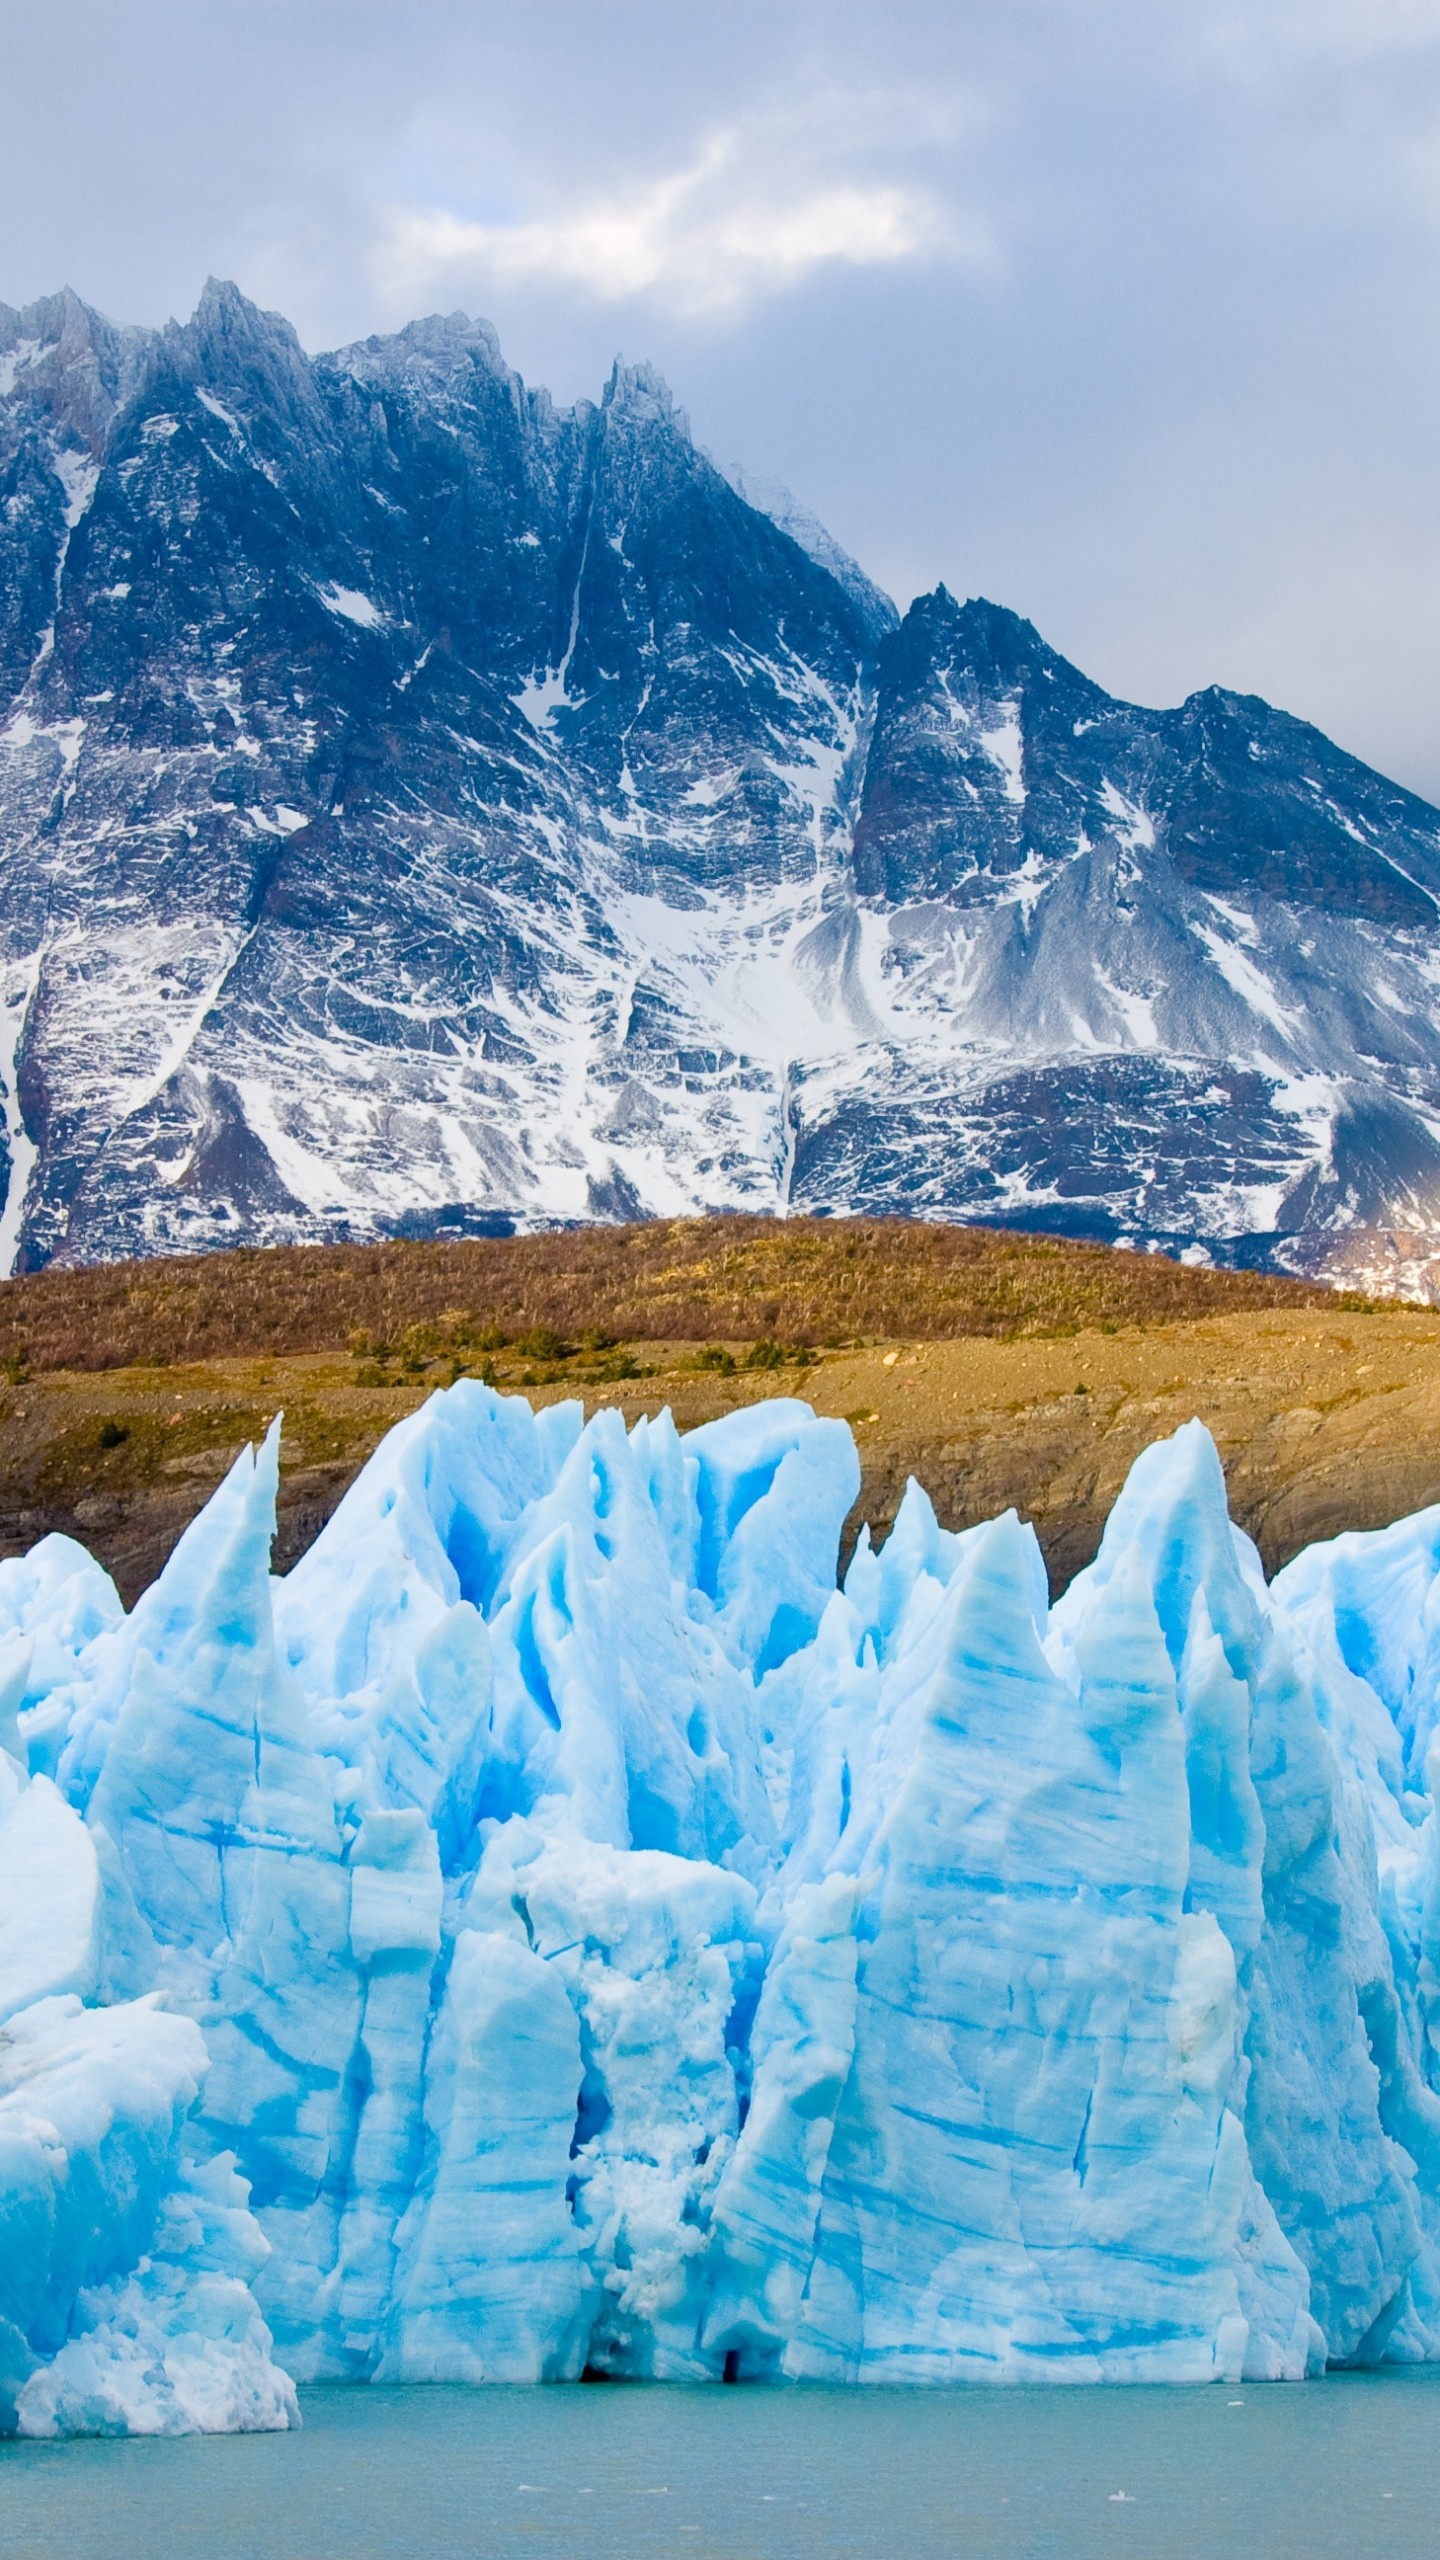 Chile: The country joined the OECD in 2010, Glacier, Countryside. 1440x2560 HD Wallpaper.